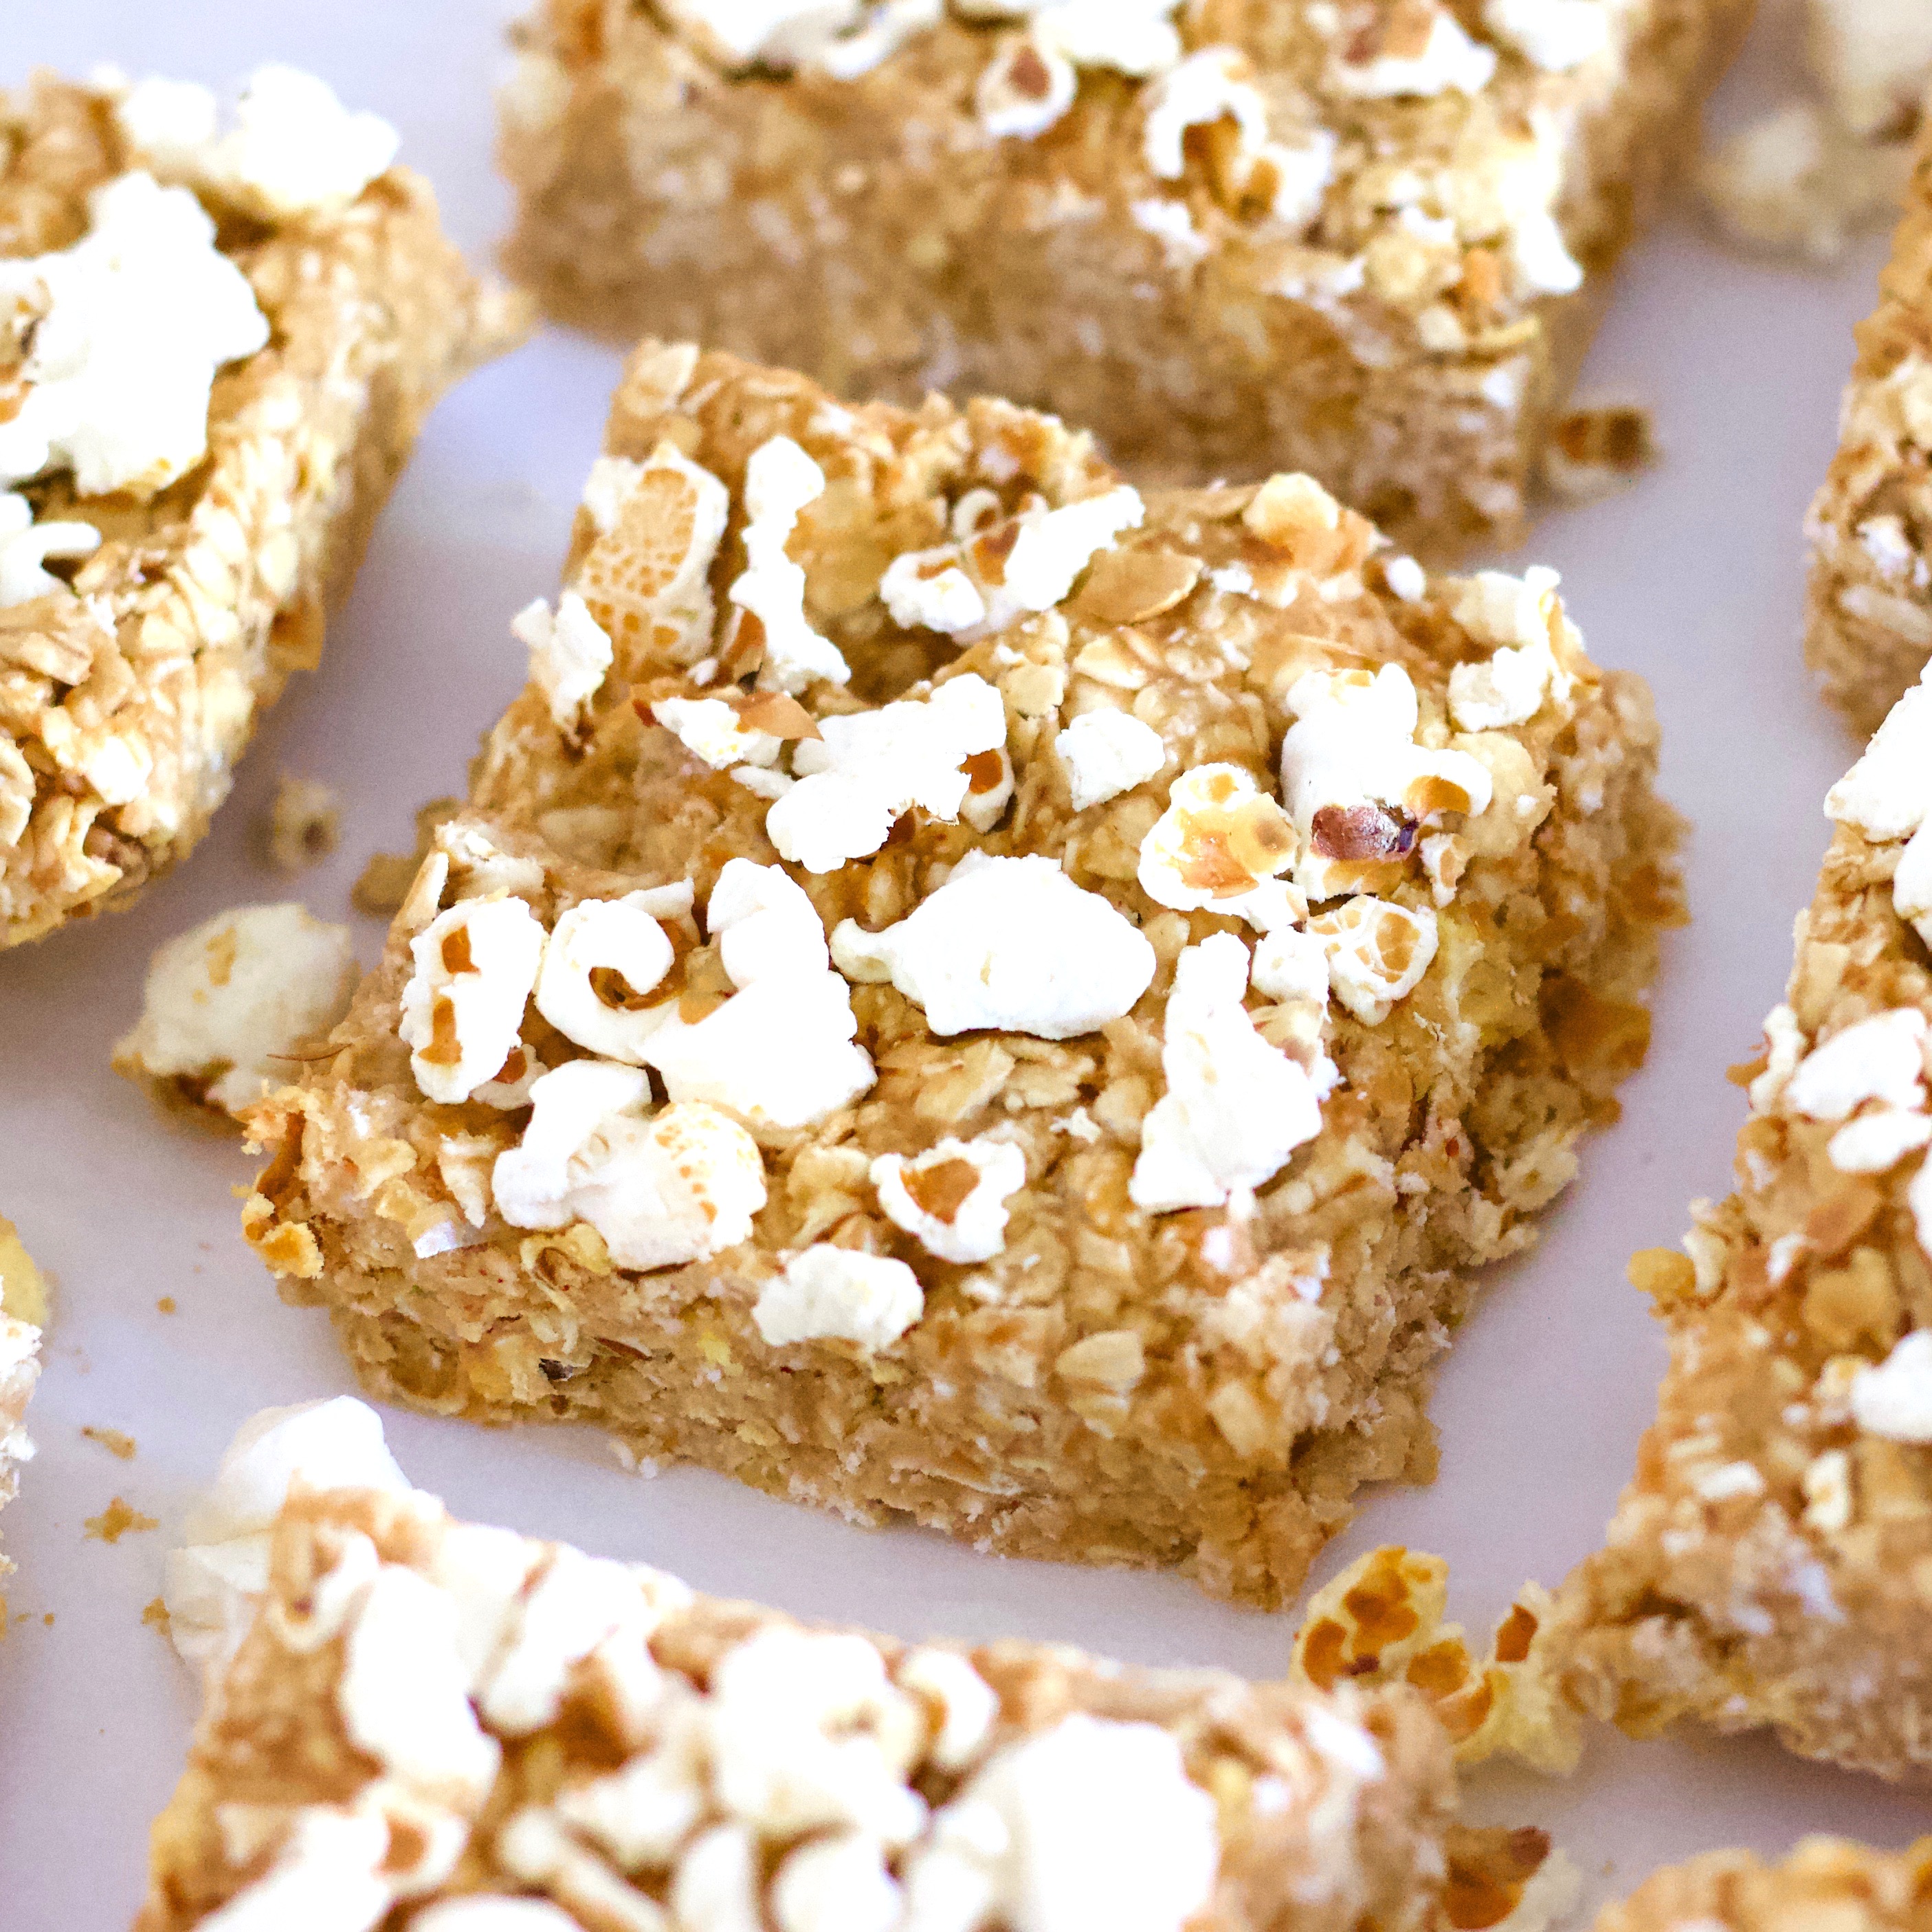 These No-Bake Peanut Butter Popcorn bars are totally delicious! They're super healthy and the perfect kid-friendly snack or treat. They are vegan, gluten-free, low-fat, dairy-free and sugar-free.